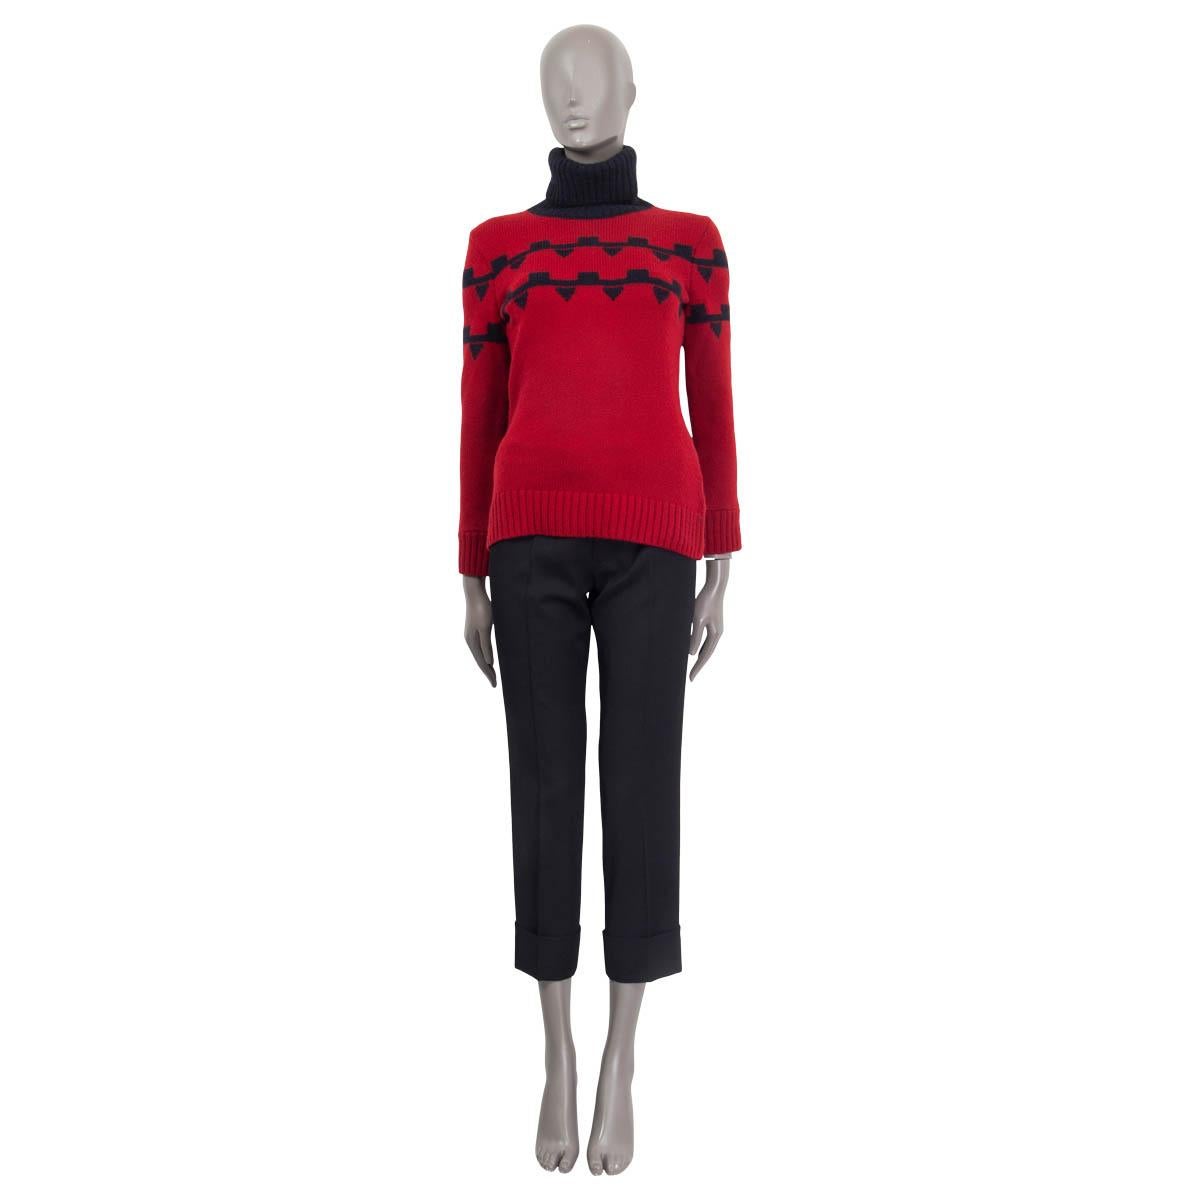 100% authentic Hermès chunky turtleneck sweater in red and navy blue cashmere (100%). Fall/winter 2018 collection. Embellished with rectangle and square embroideries in navy blue on the front, the back and the sleeves. Unlined. Has been worn and is